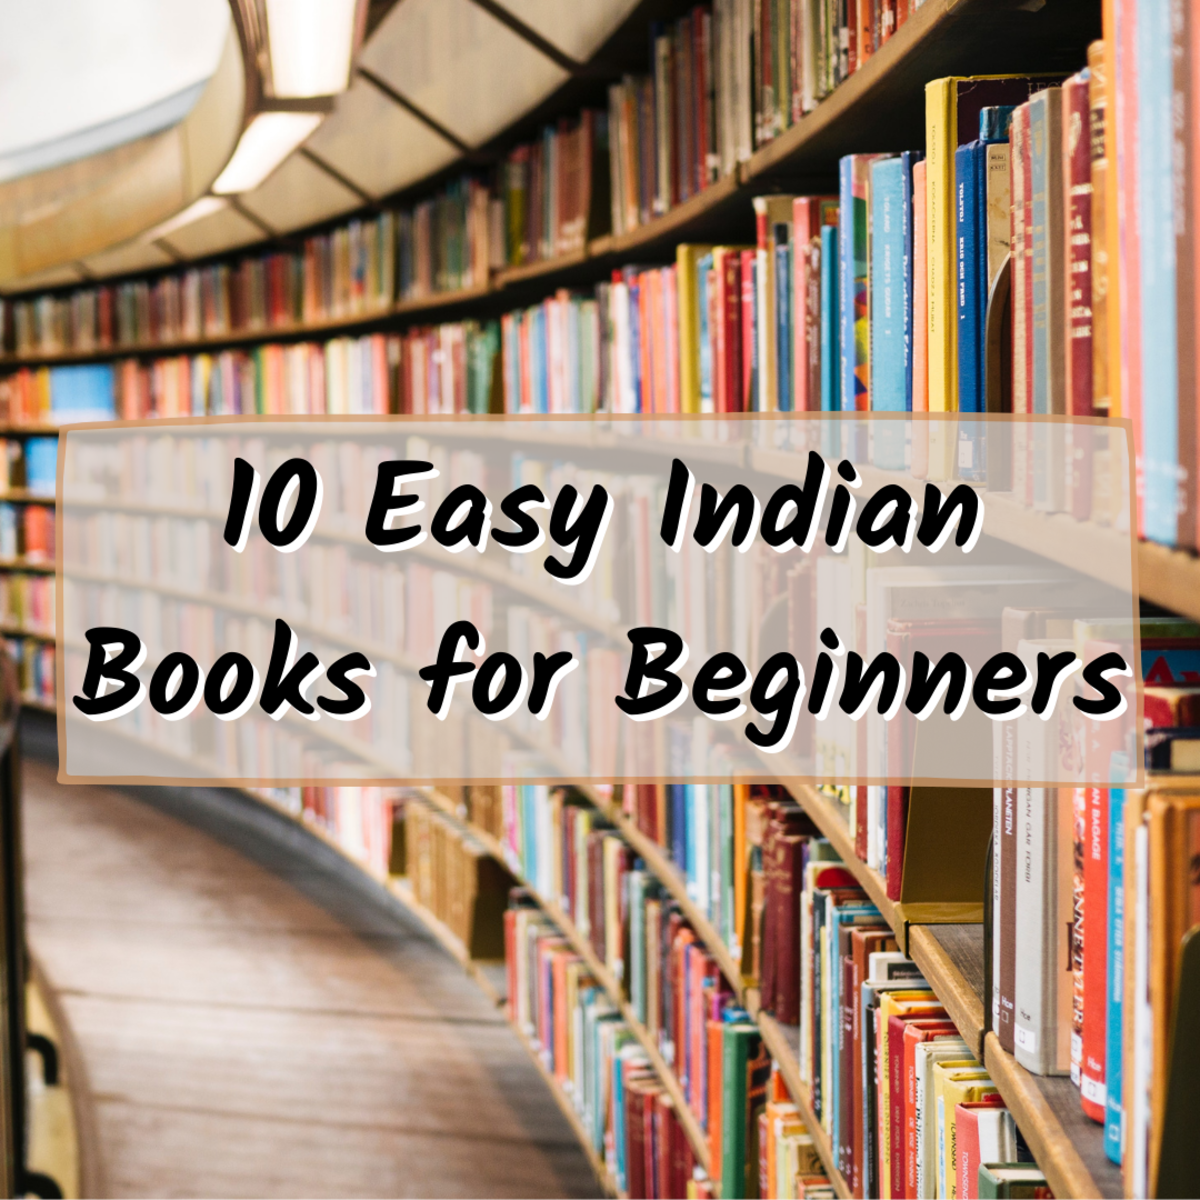 Read on to find 10 books for beginners by Indian authors. You'll also find advice on how to cultivate a daily reading habit!